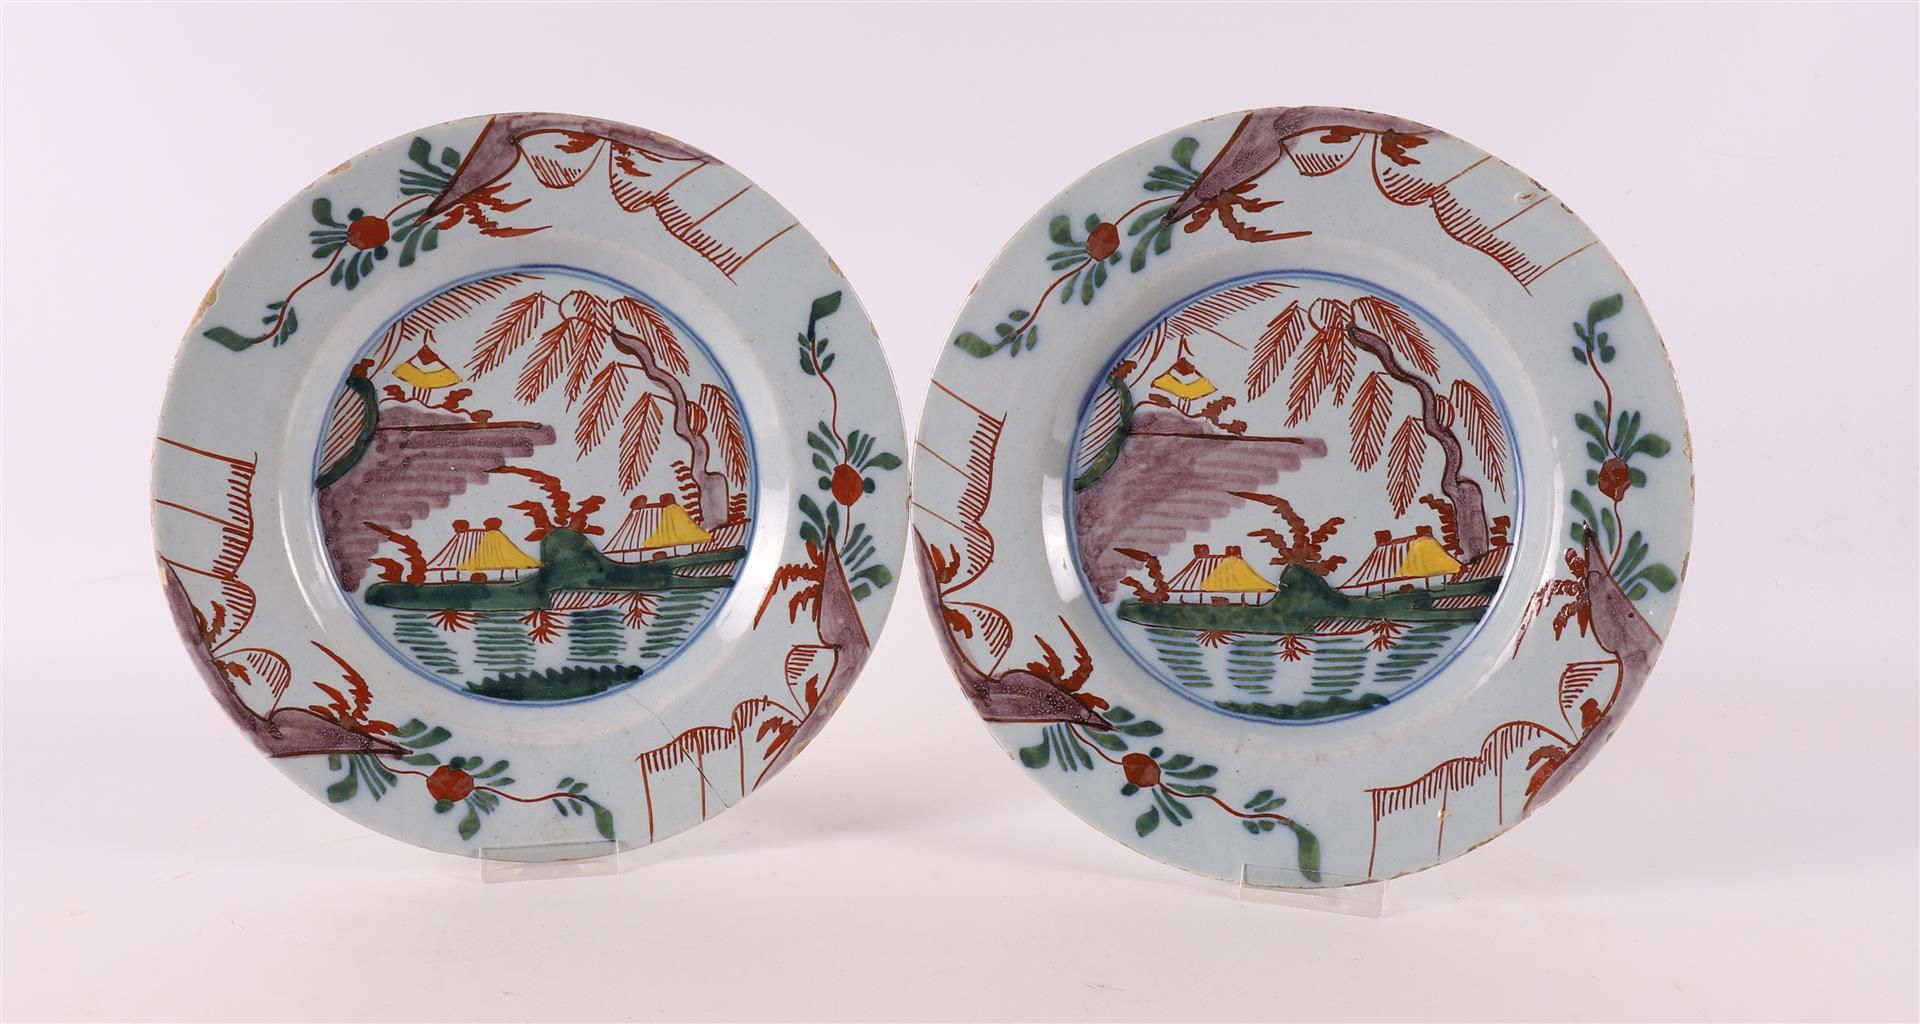 A set of polychrome Delft earthenware plates, Holland, 18th century. Polychrome decor from